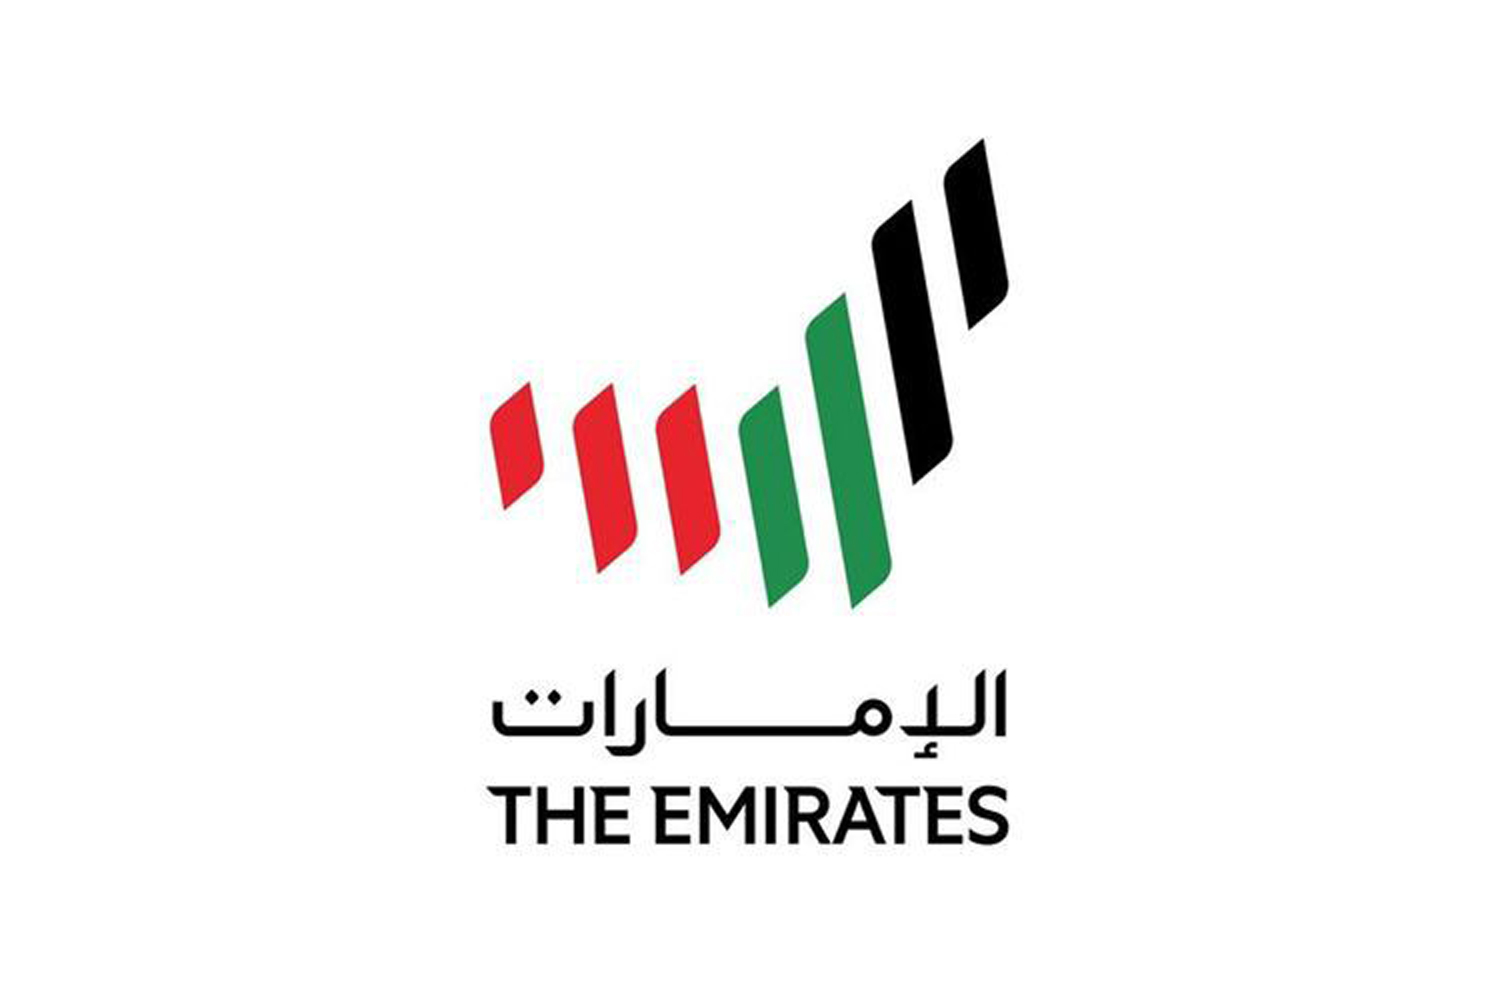 The UAE's new logo has been decided | News | Time Out Dubai